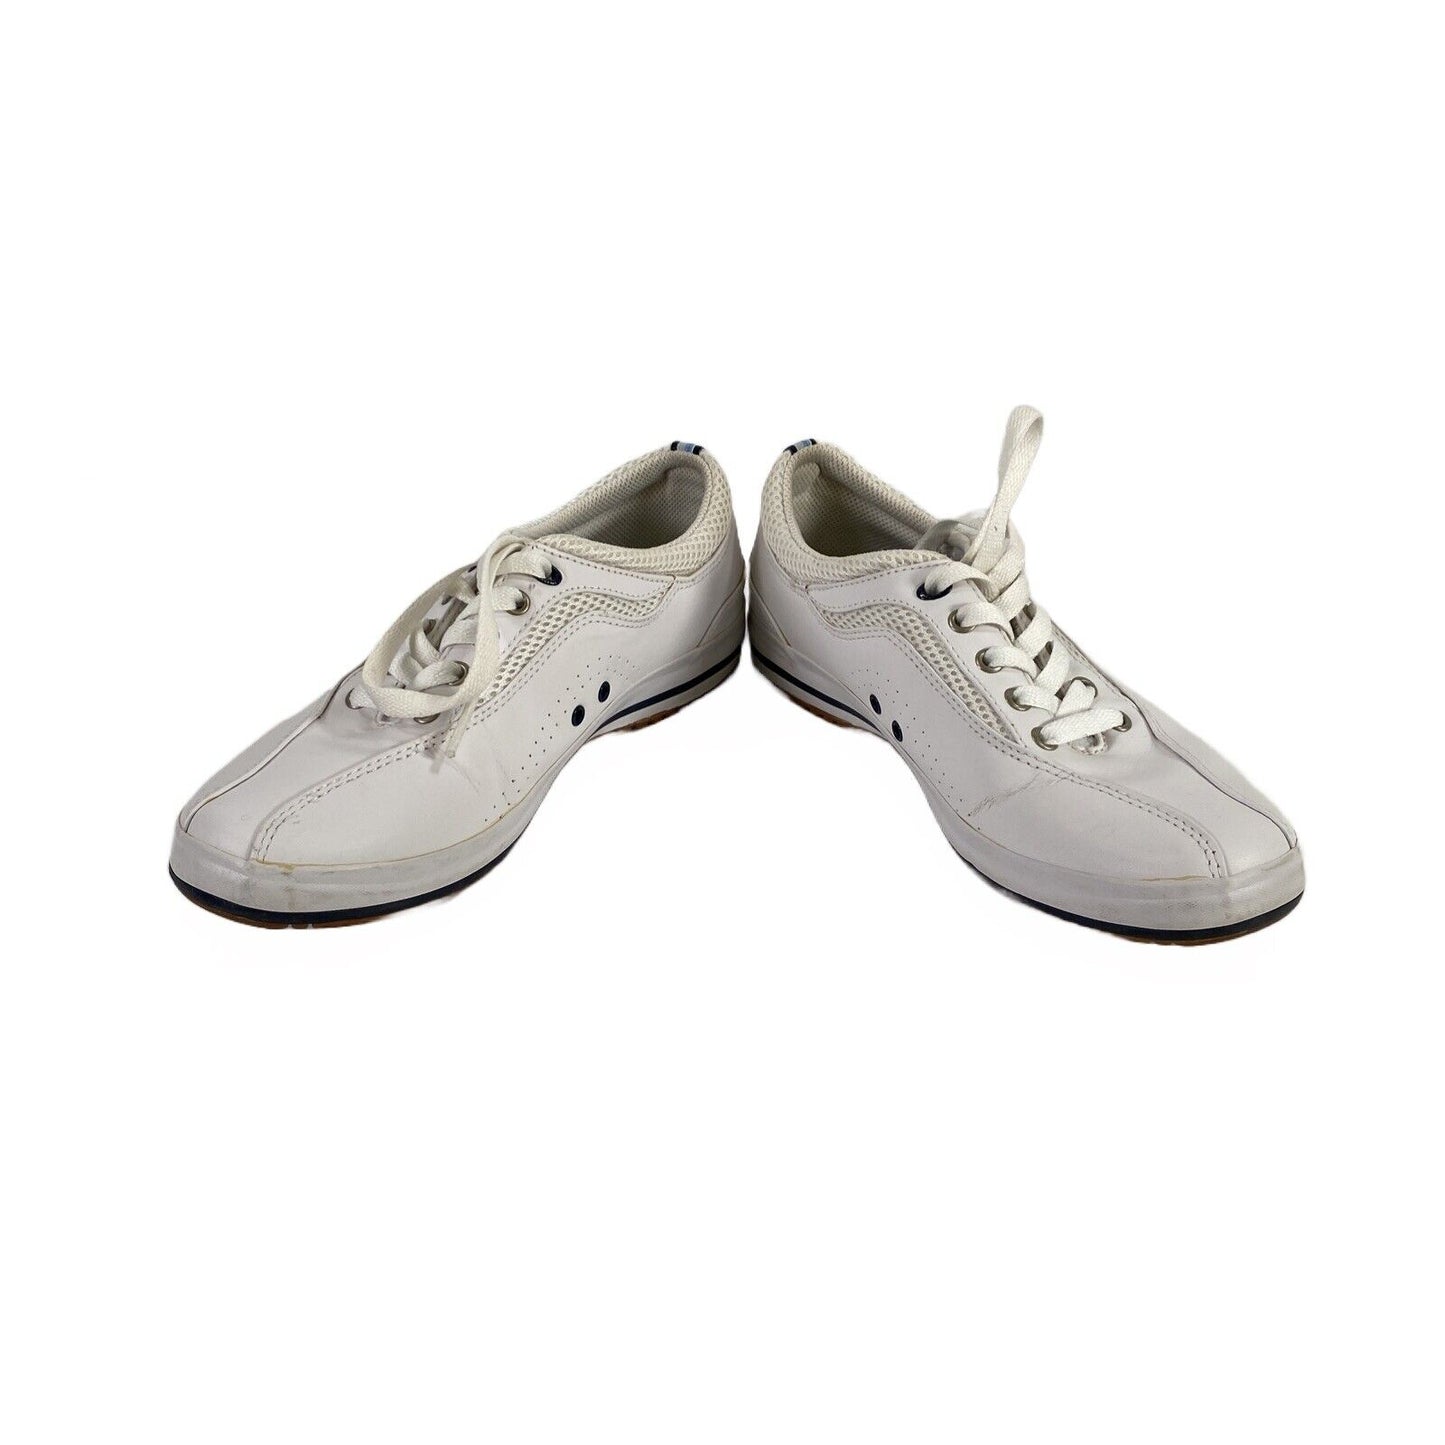 Keds Women's White Leather Champion Lace Up Sneakers - 7